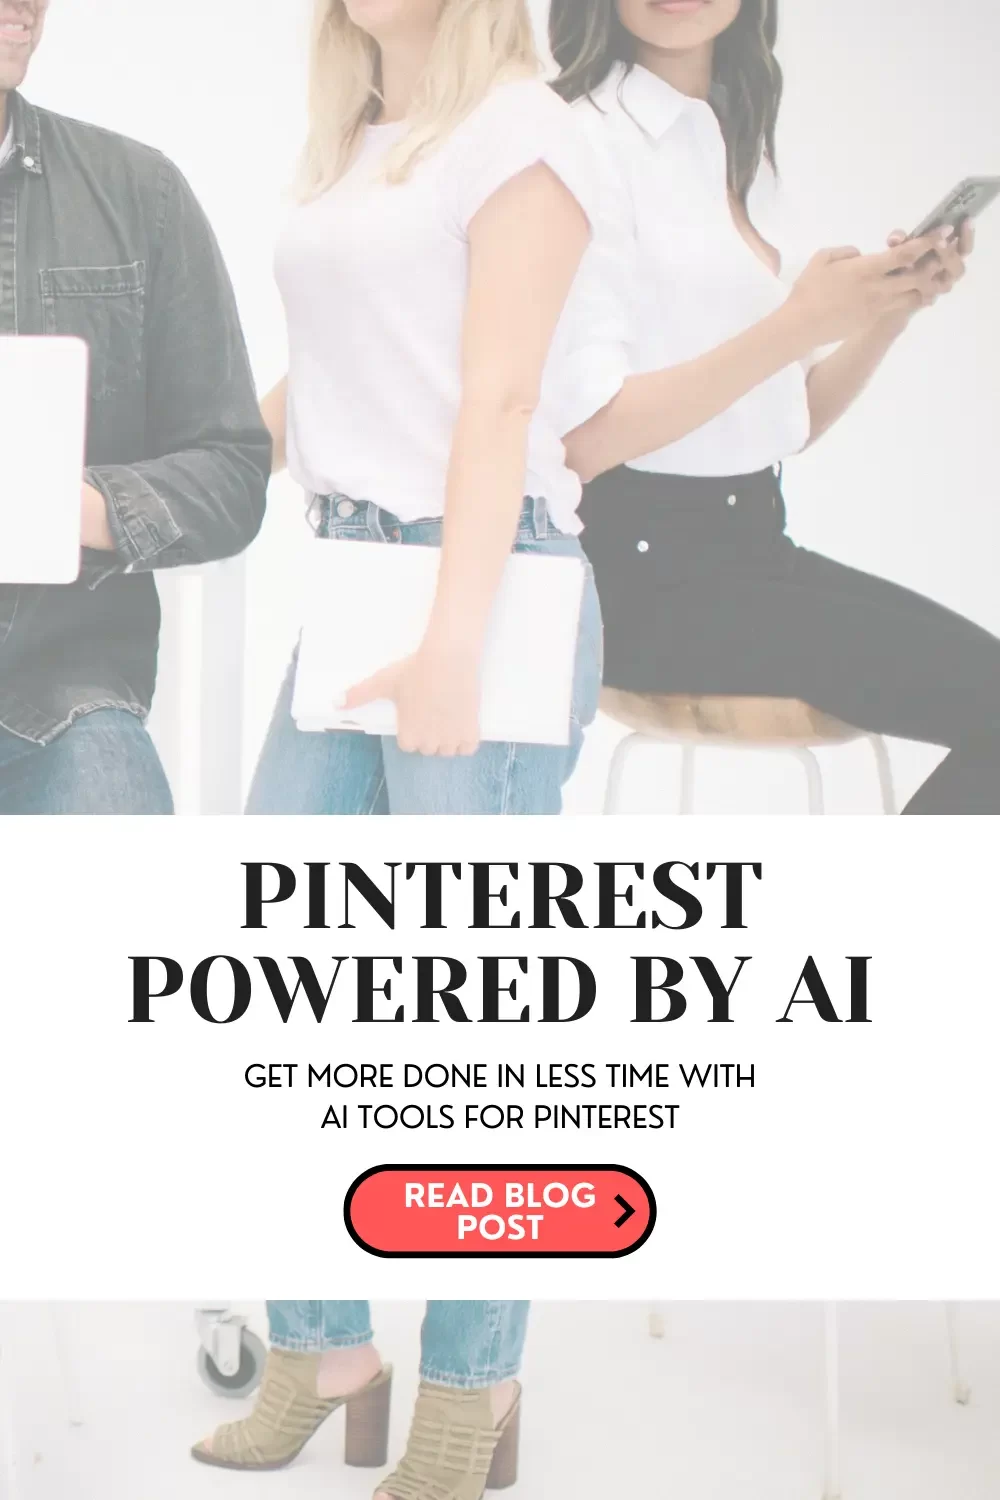 Pinterest powered by AI, group of adults standing around in background under text overlay